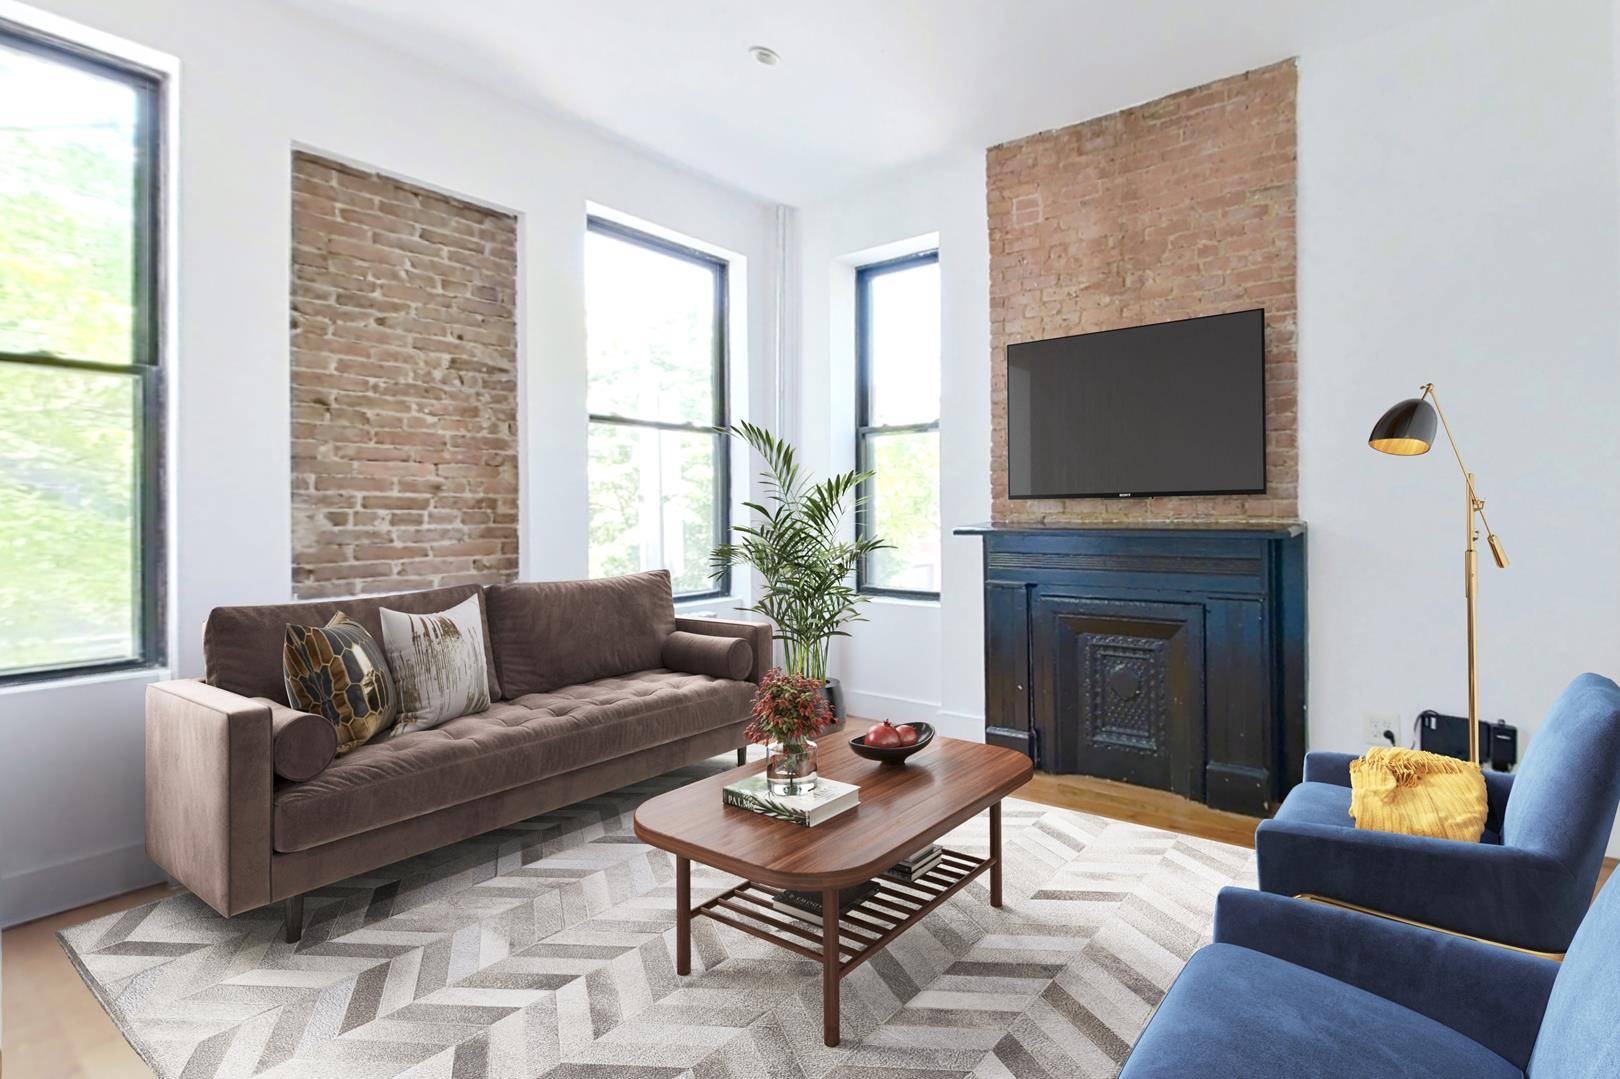 Pristine renovations and incredible light are waiting for you right now in historic Carroll Gardens.